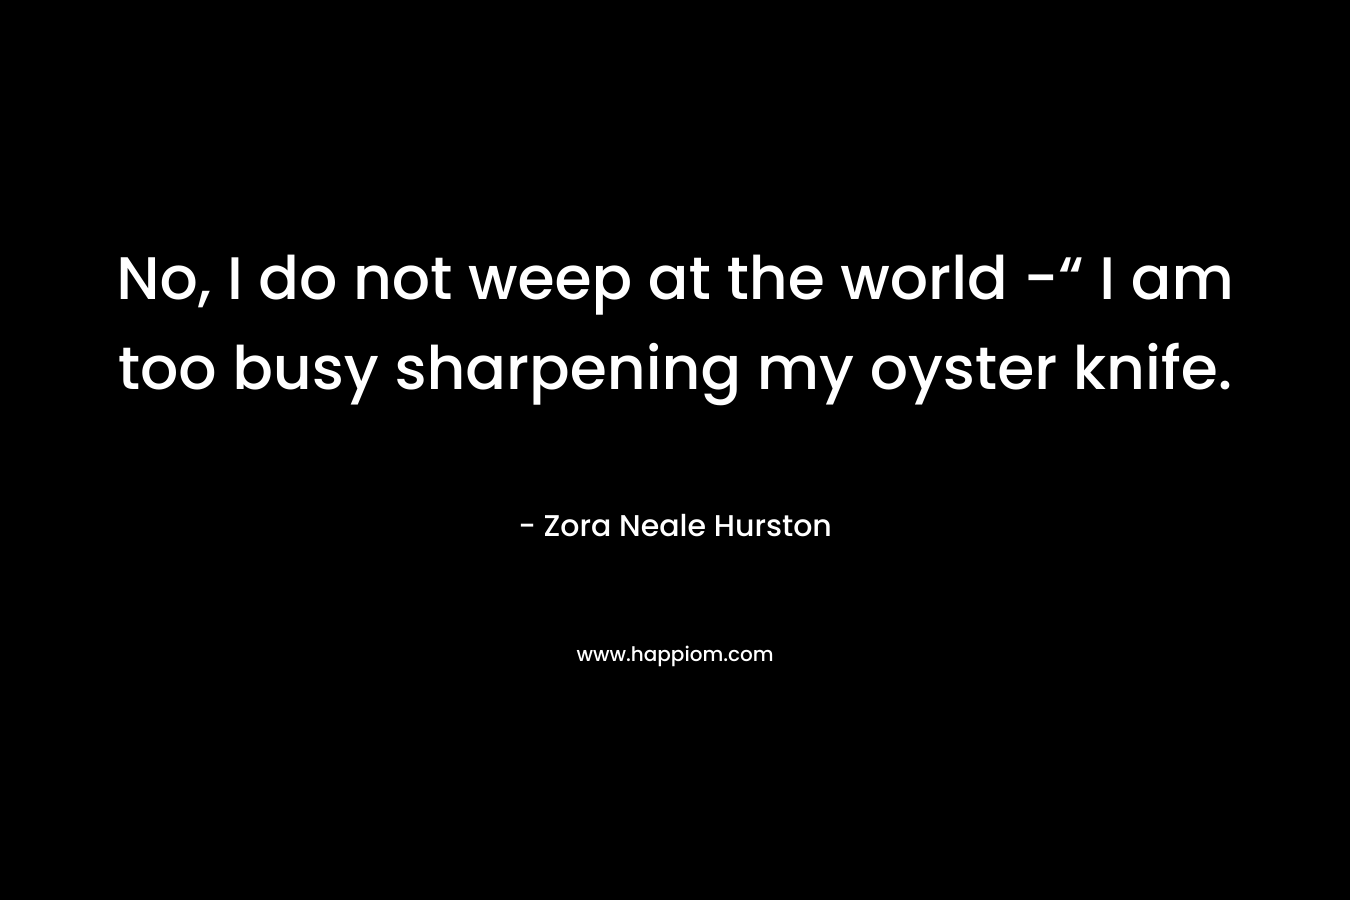 No, I do not weep at the world -“ I am too busy sharpening my oyster knife. – Zora Neale Hurston